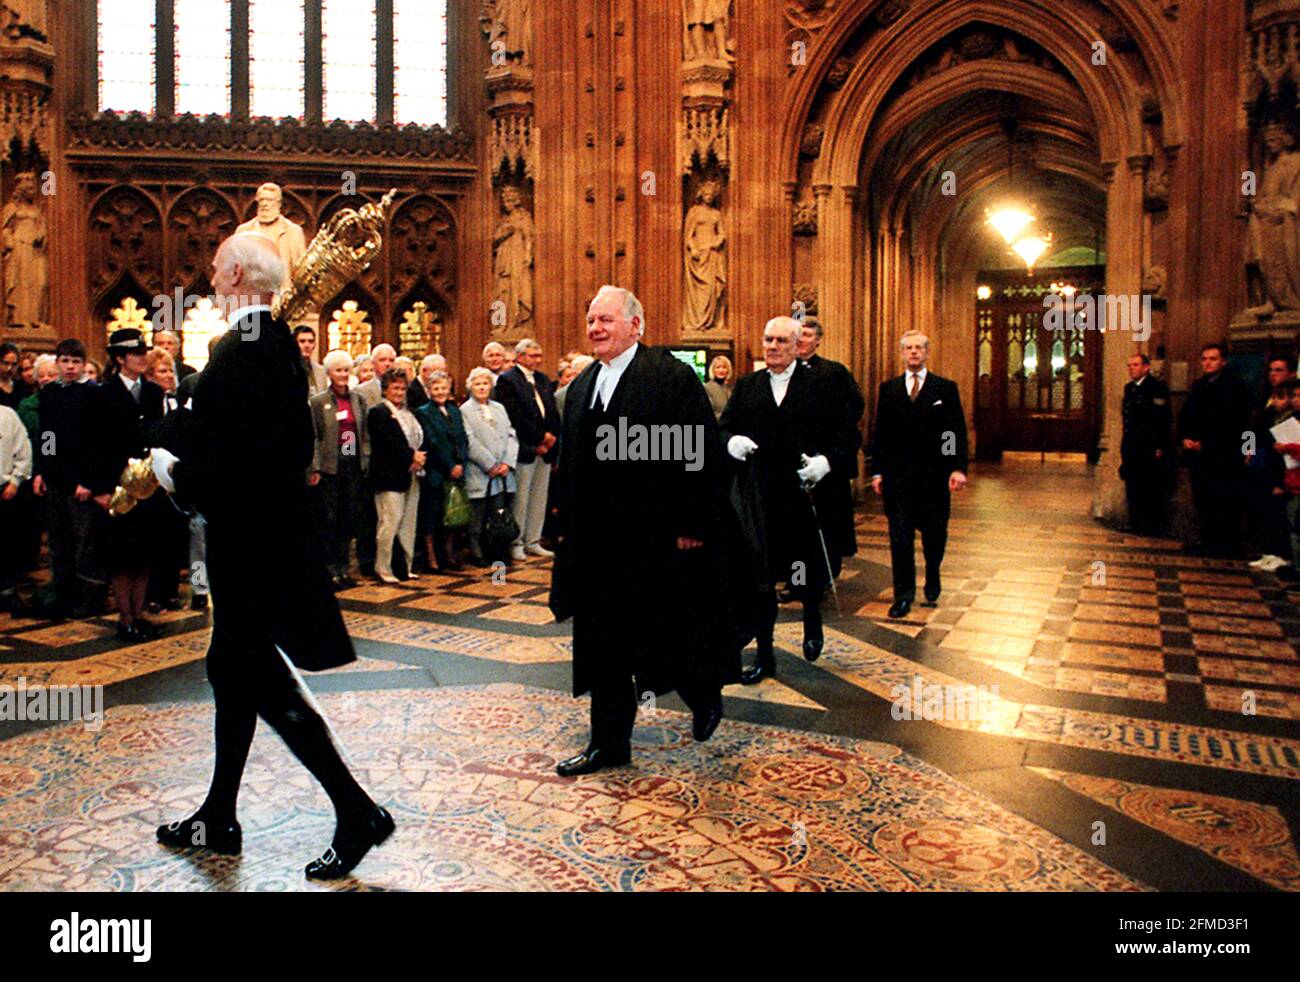 MICHAEL MARTIN, OCTOBER 2000 NEW SPEAKER OF THE HOUSE OF COMMONS, PROCESSES THROUGH CENTRAL LOBBY TO PRESIDE OVER HIS FIRST SITTING OF THE HOUSE AS SPEAKER. Stock Photo